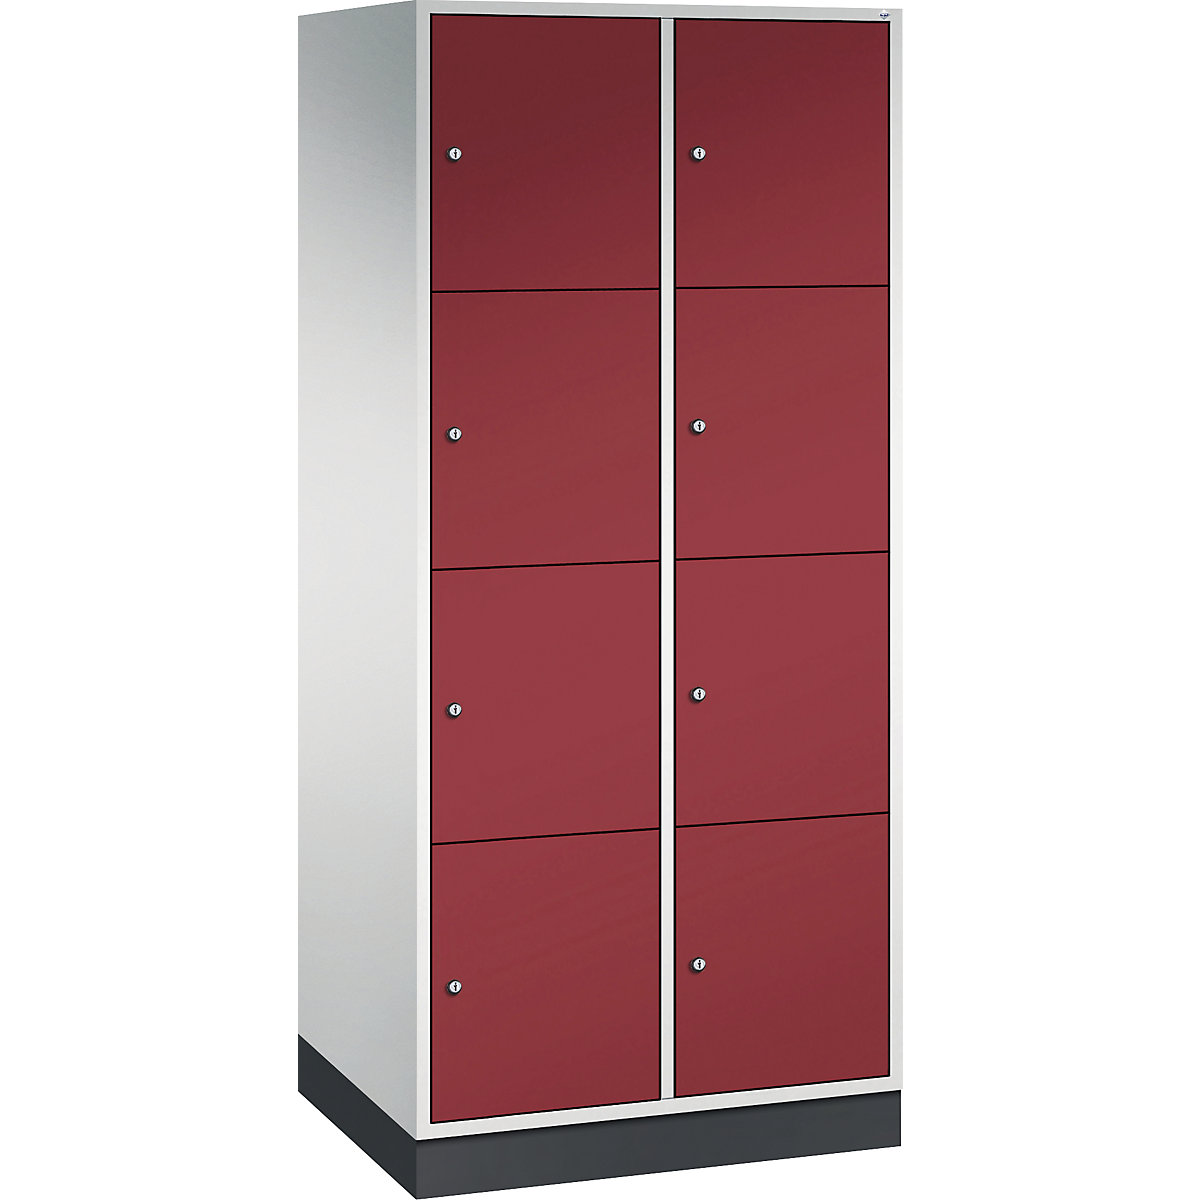 INTRO steel compartment locker, compartment height 435 mm – C+P, WxD 820 x 600 mm, 8 compartments, light grey body, ruby red doors